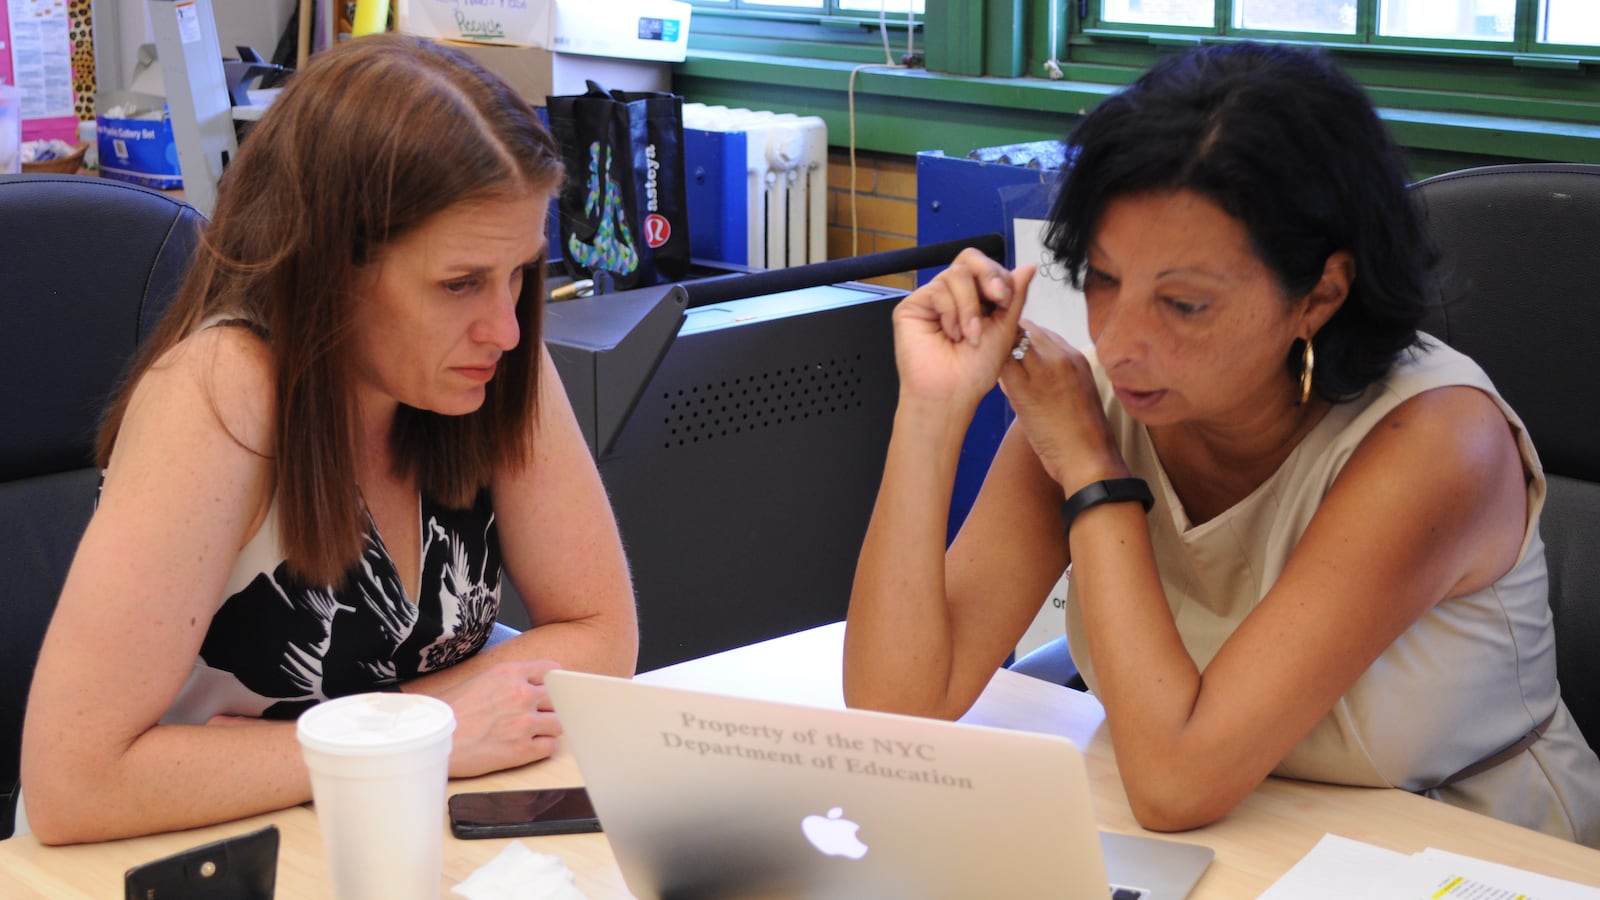 Devon Eisenberg, left, looks over graduation ceremony plans with co-director LeMarie Laureano at the Young Women's Leadership School in the Bronx.